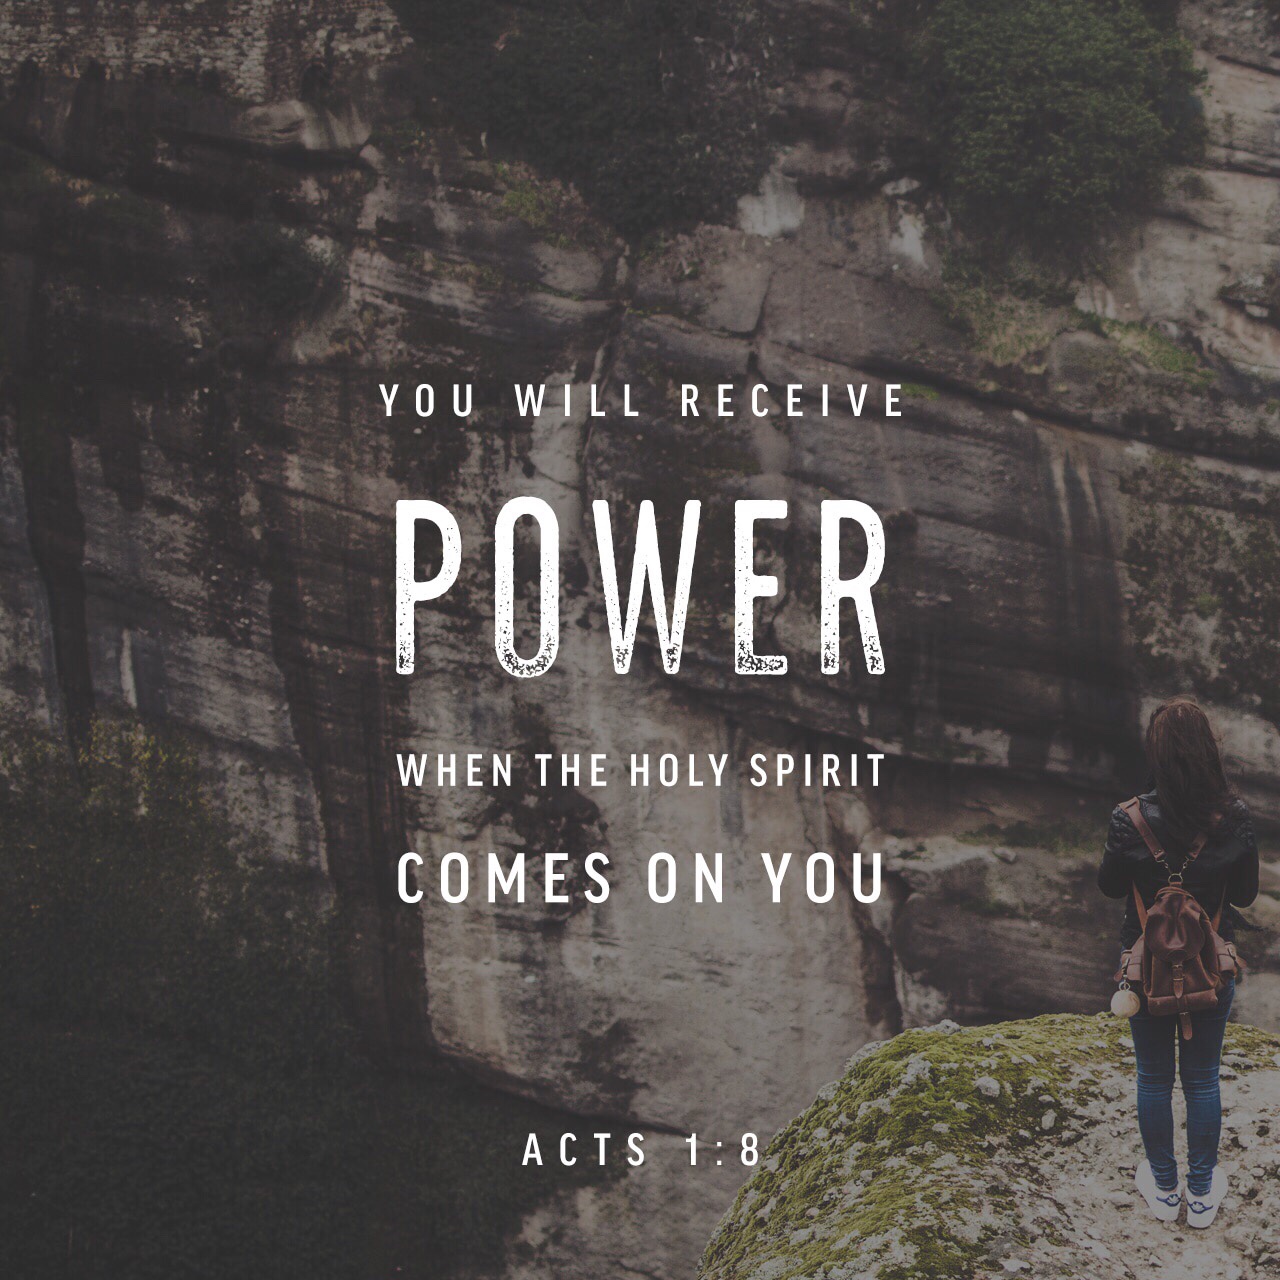 VOTD June 10, 2019“but you will receive power when the Holy Spirit has come upon you; and you shall be My witnesses both in Jerusalem, and in all Judea and Samaria, and even to the remotest part of the earth."”‭‭ACTS‬ ‭1:8‬ ‭NASB‬‬